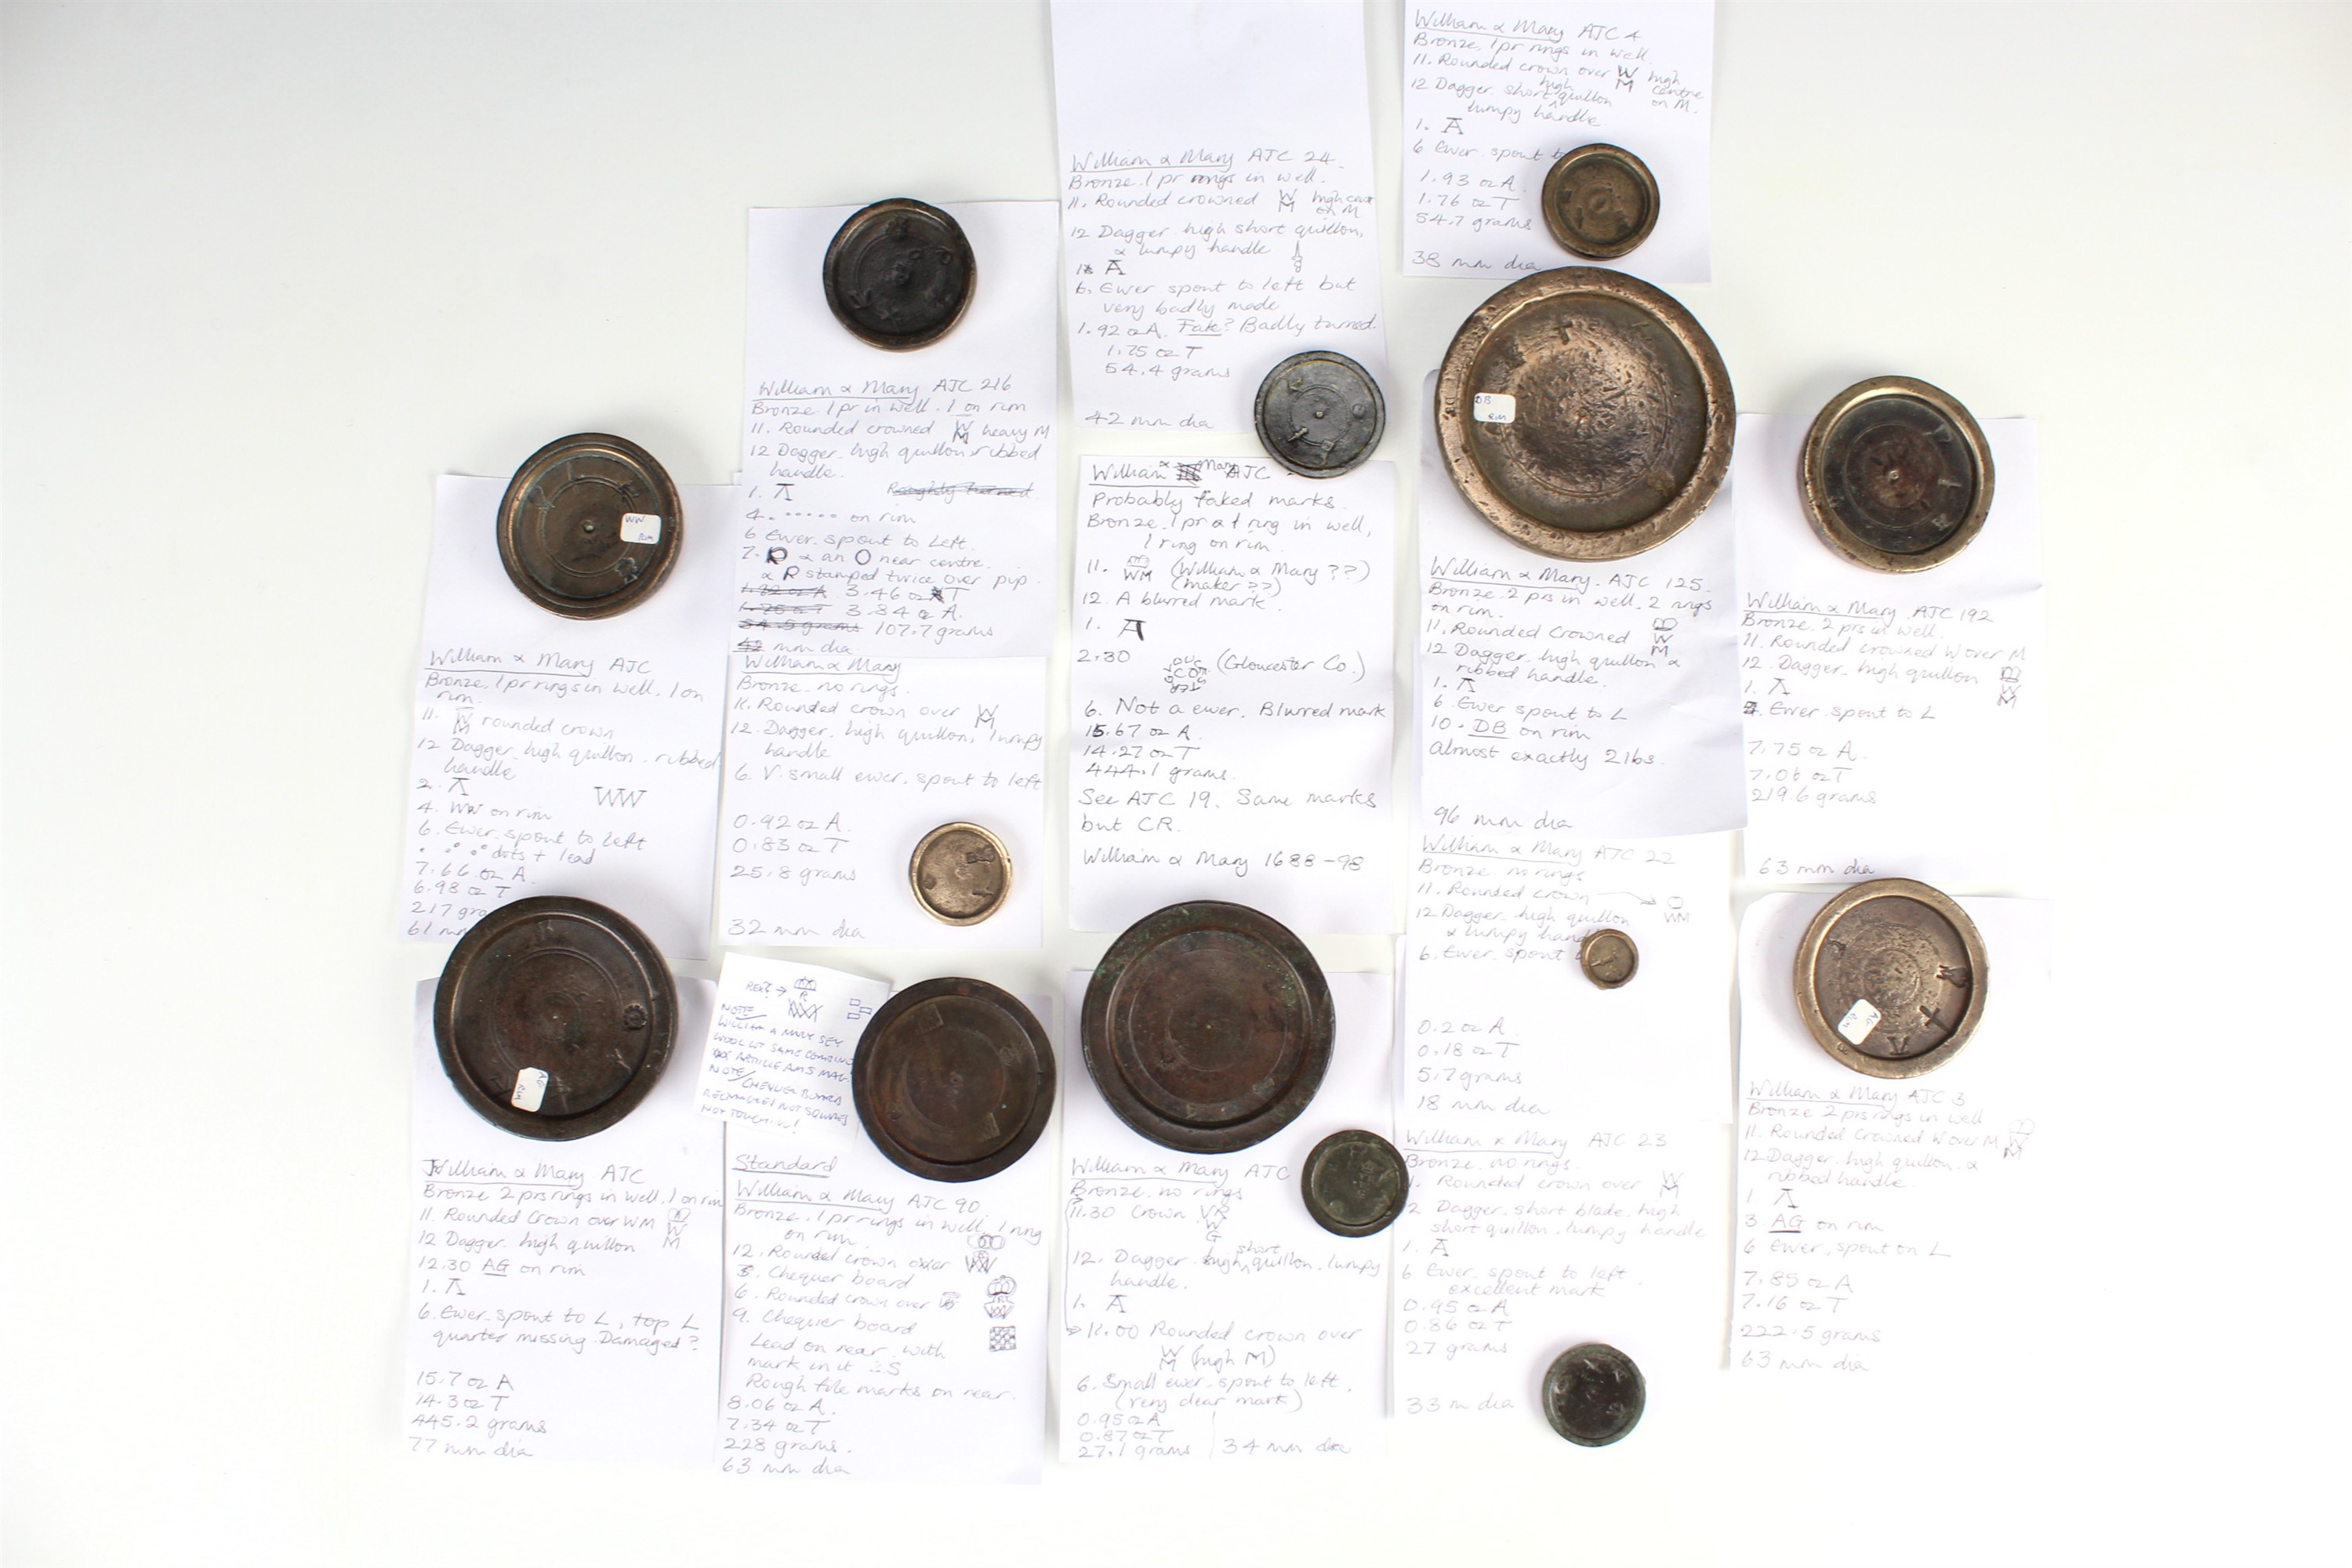 14 William and Mary bronze trade weights, including marks for 'Gloucester Co', and a chequerboard